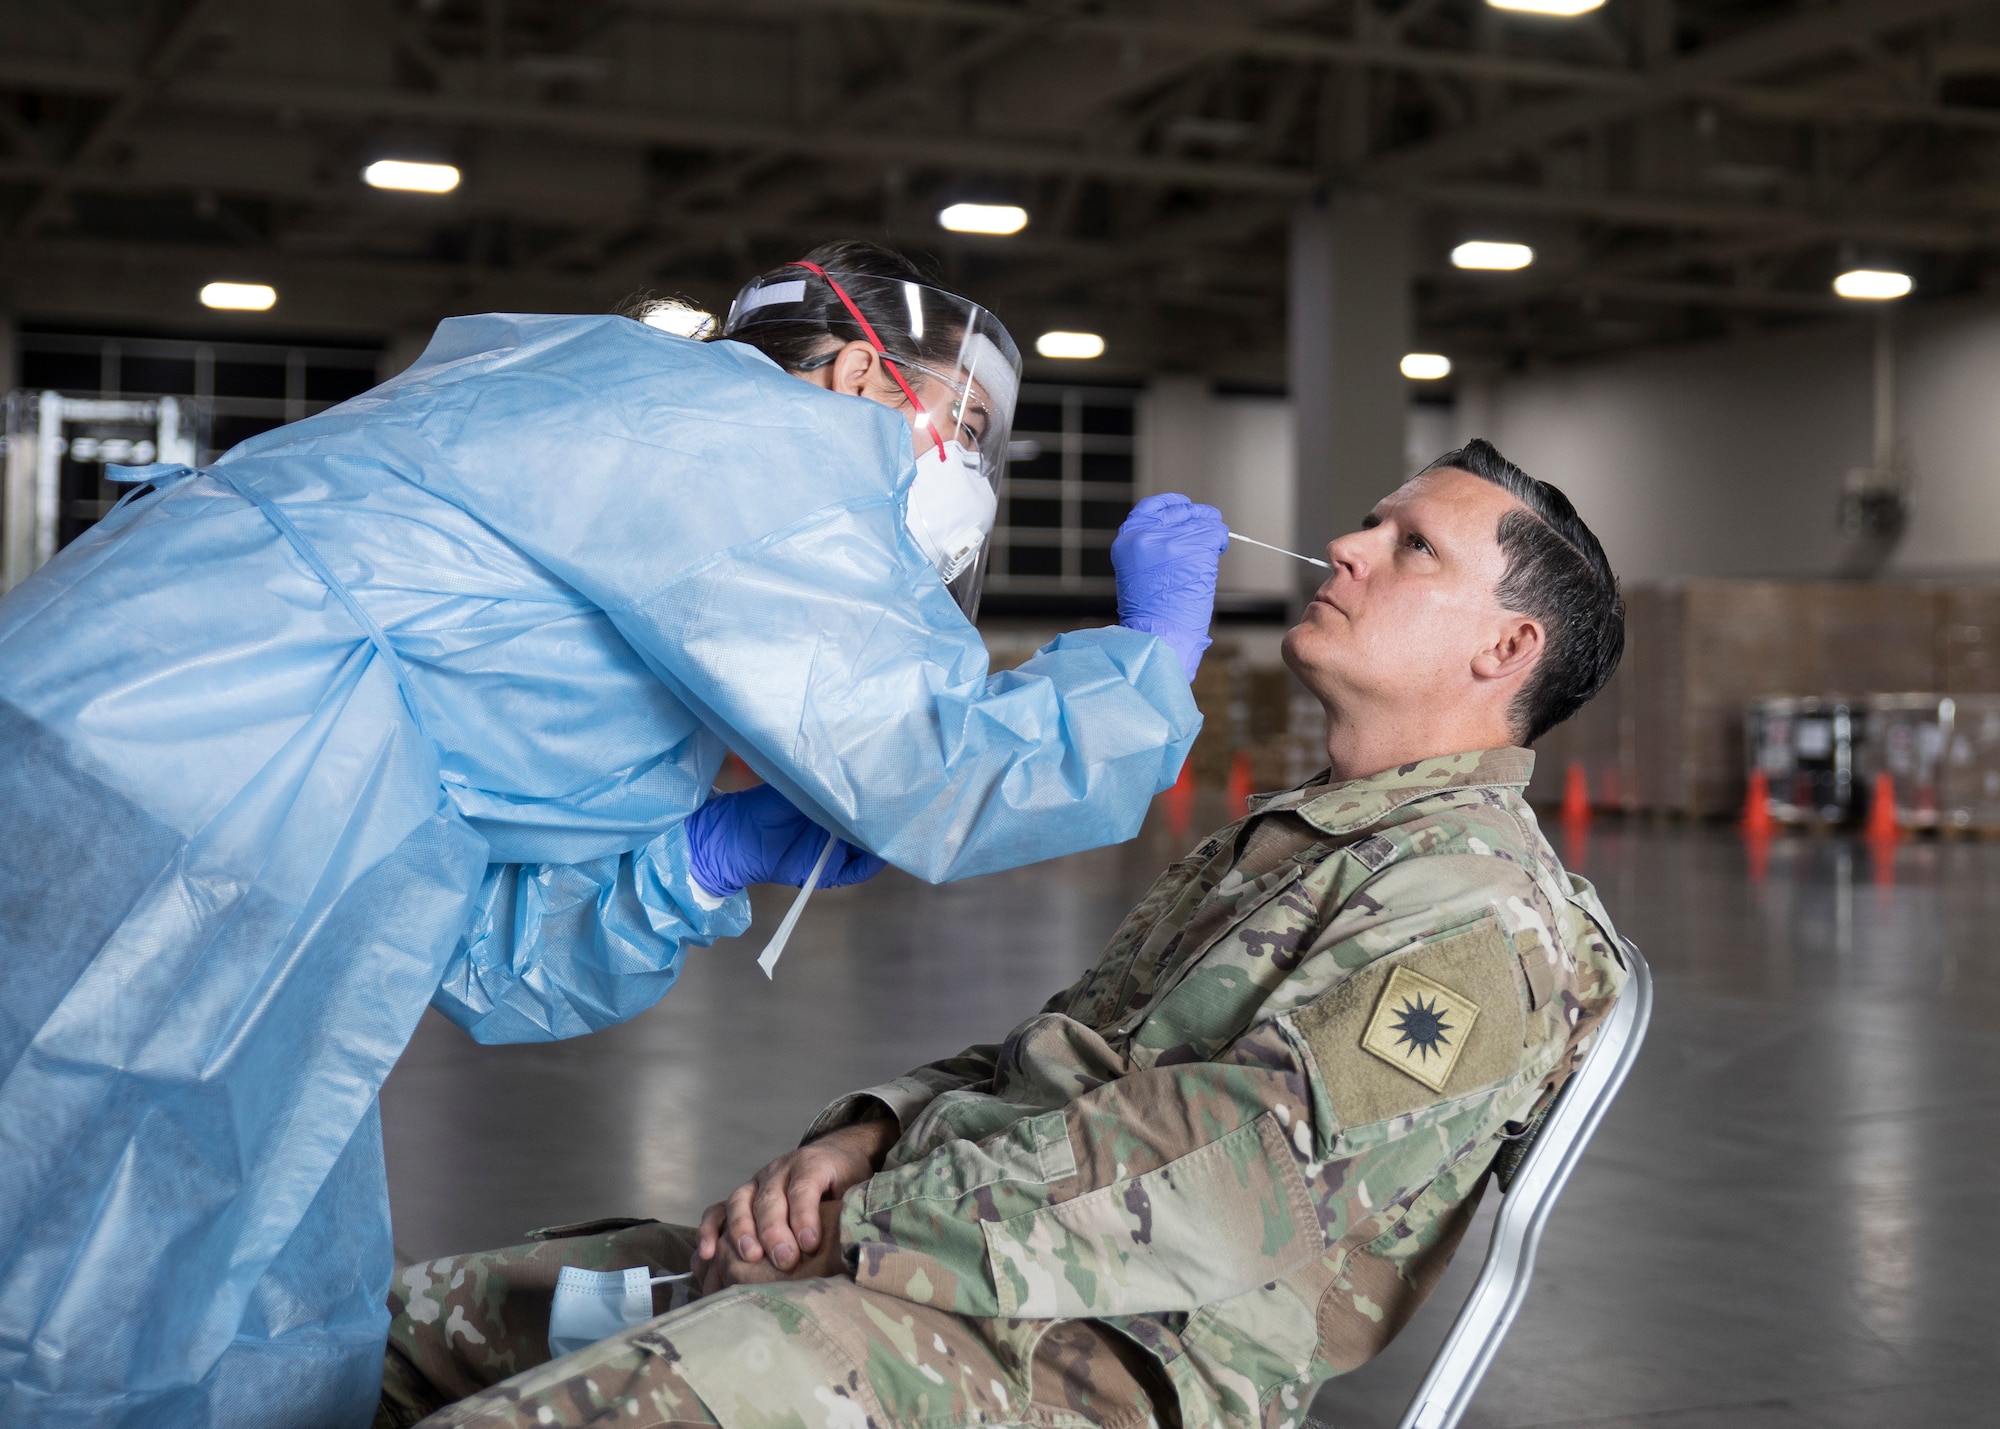 Image of U.S. Air Force Airman First Class Mary Lawrence, a medical technician assigned to the 151st Medical Group.